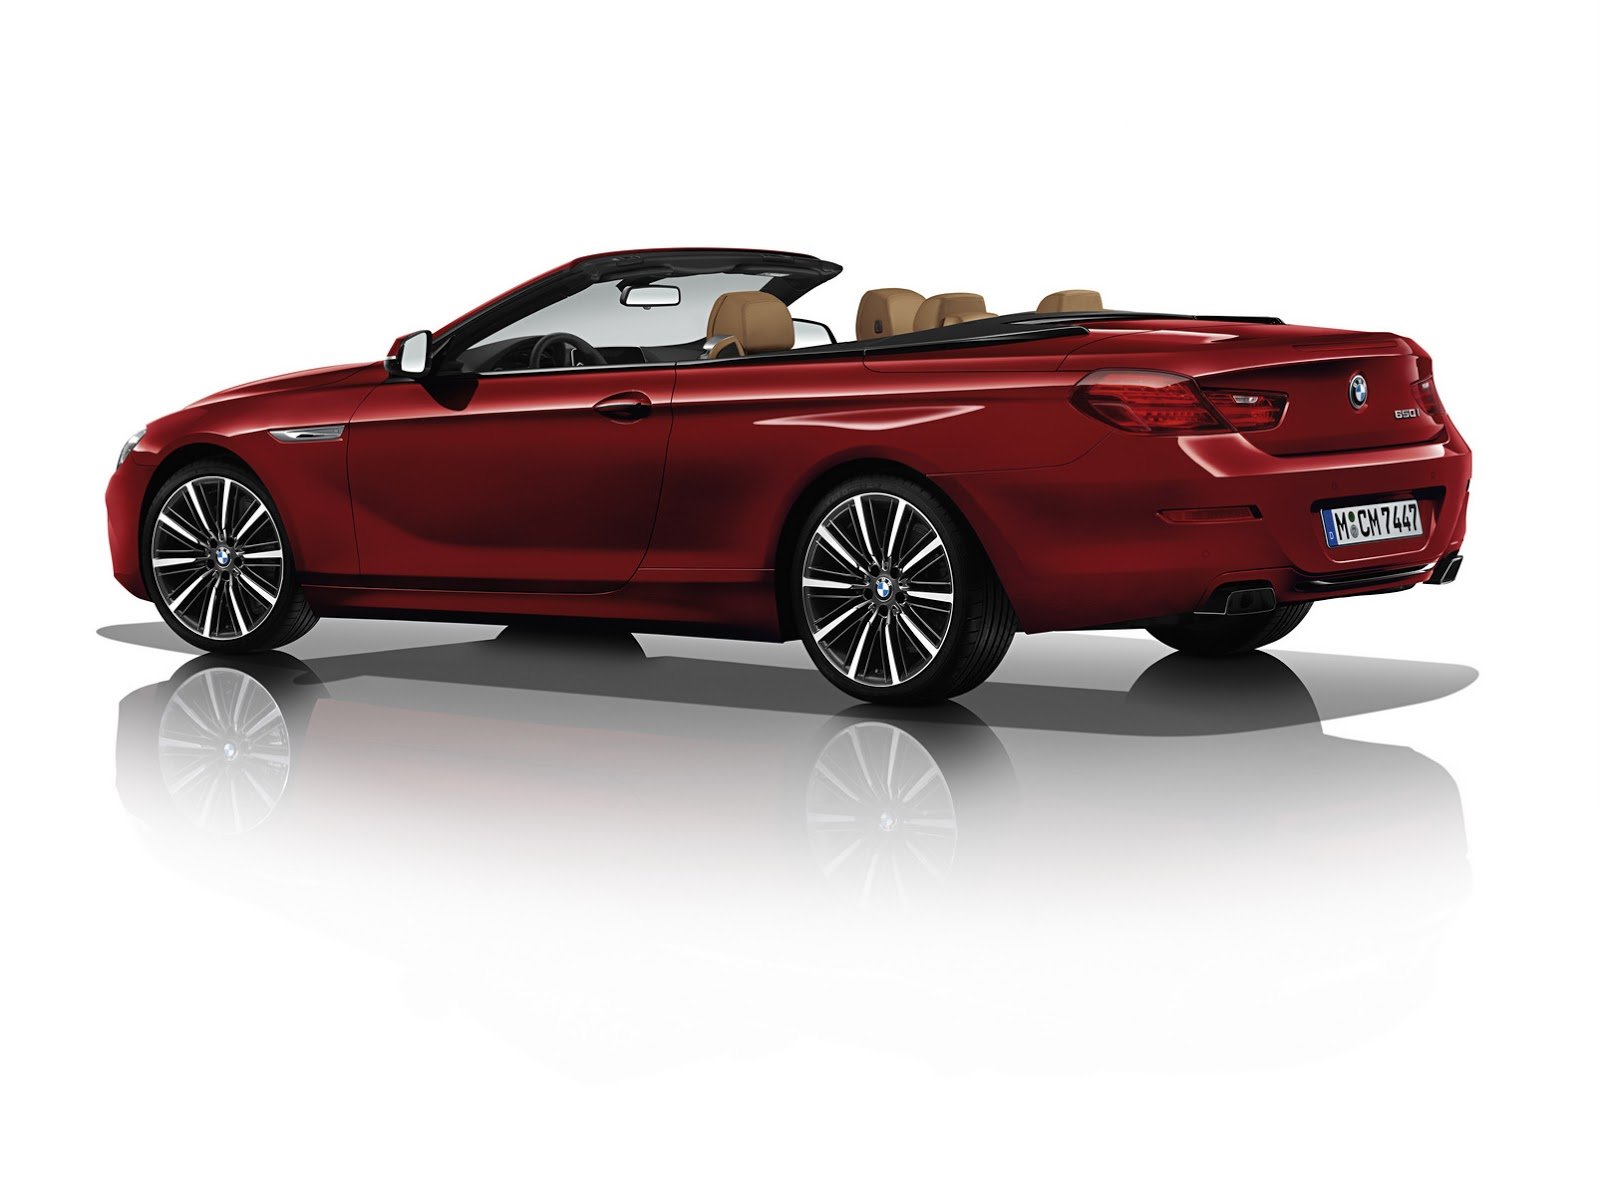 2015, Bmw, 6 series, Cabriolet, Convertible, Facelift, Cars Wallpaper